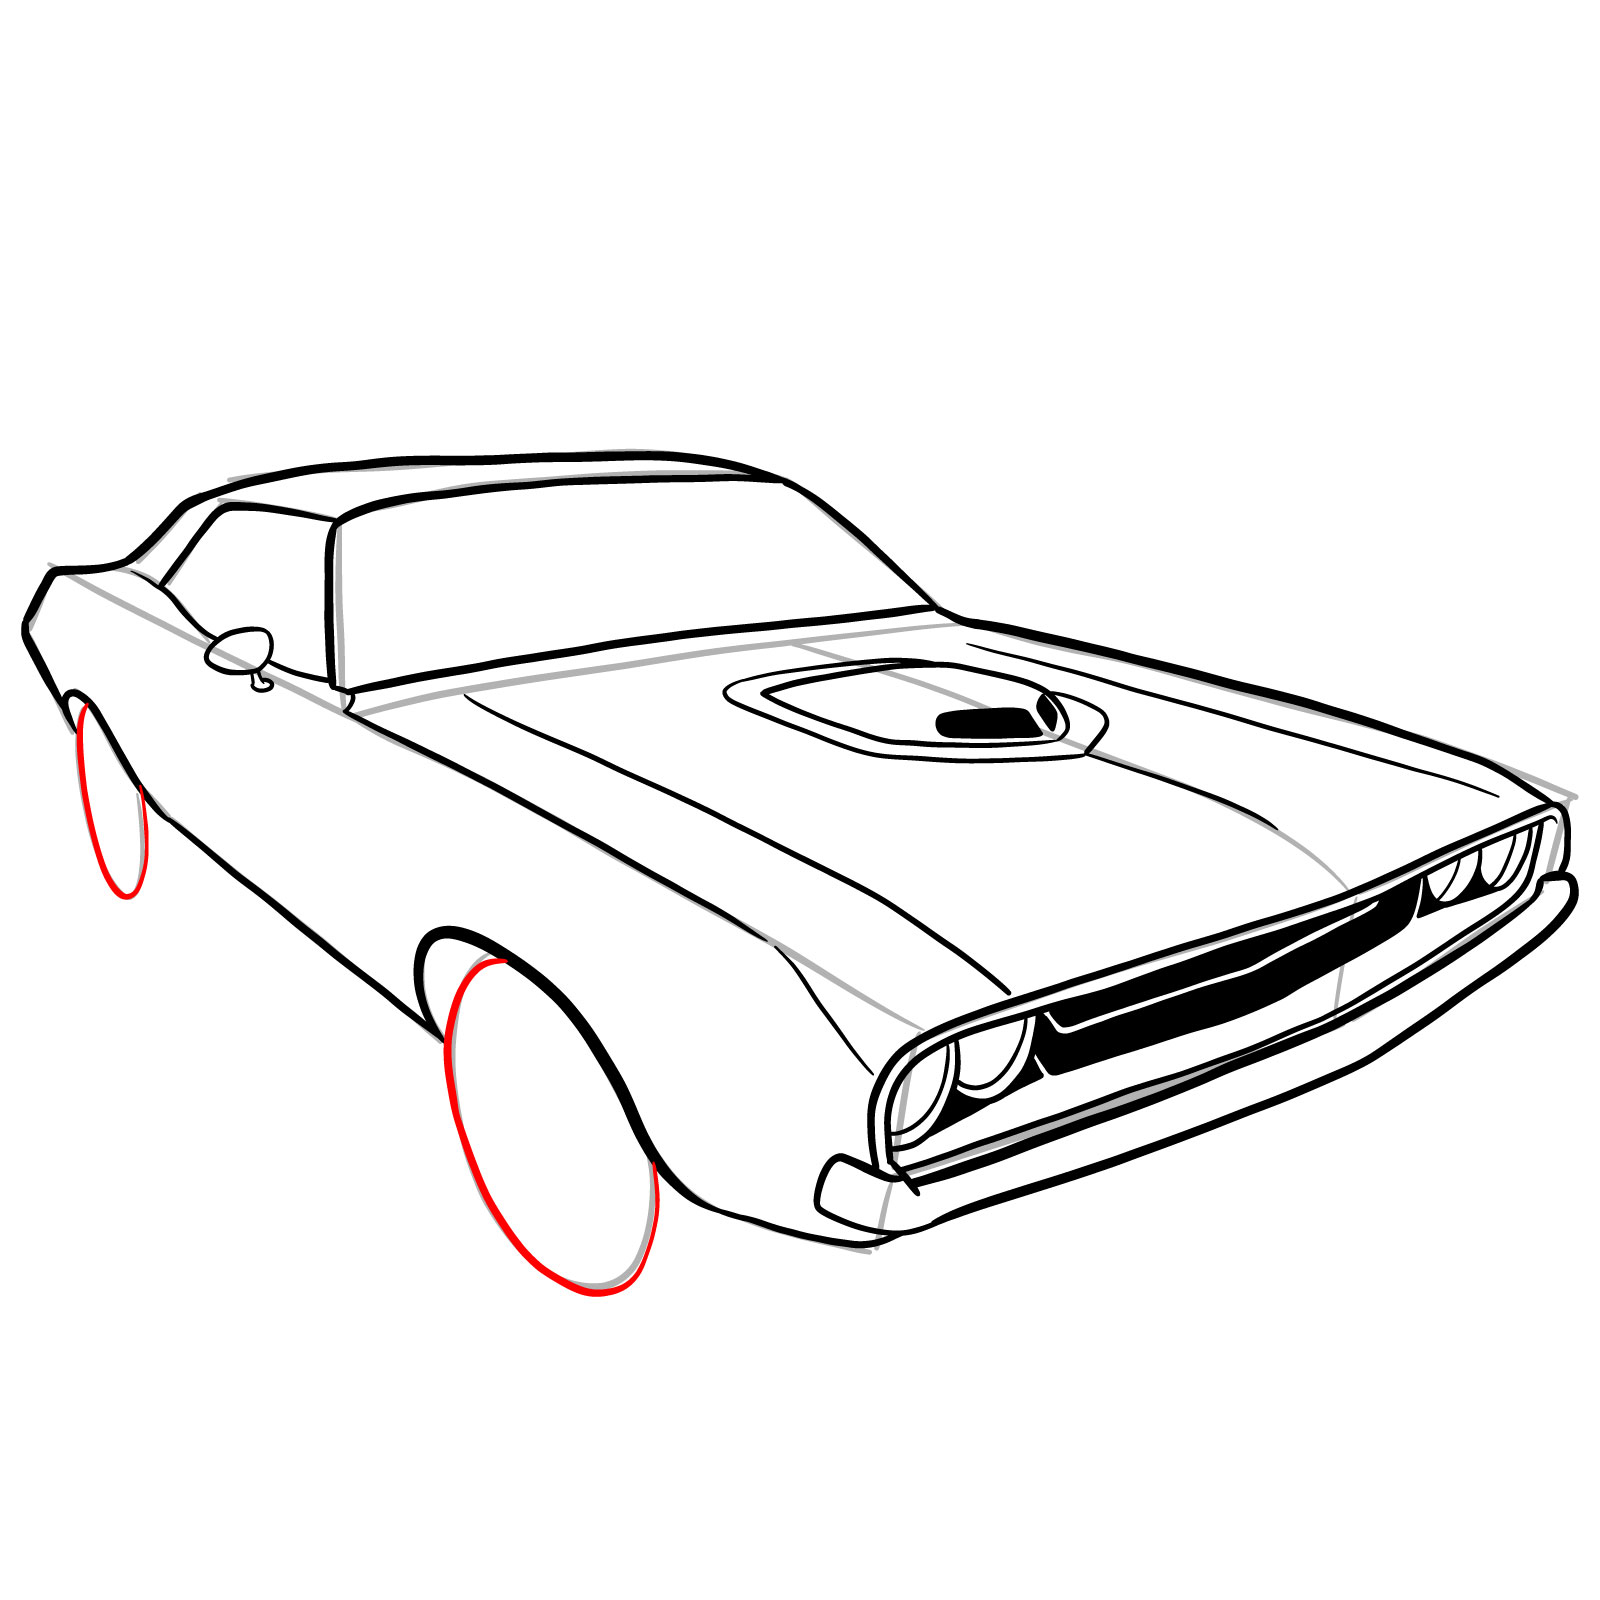 How to draw Dodge Challenger 1970 - step 26